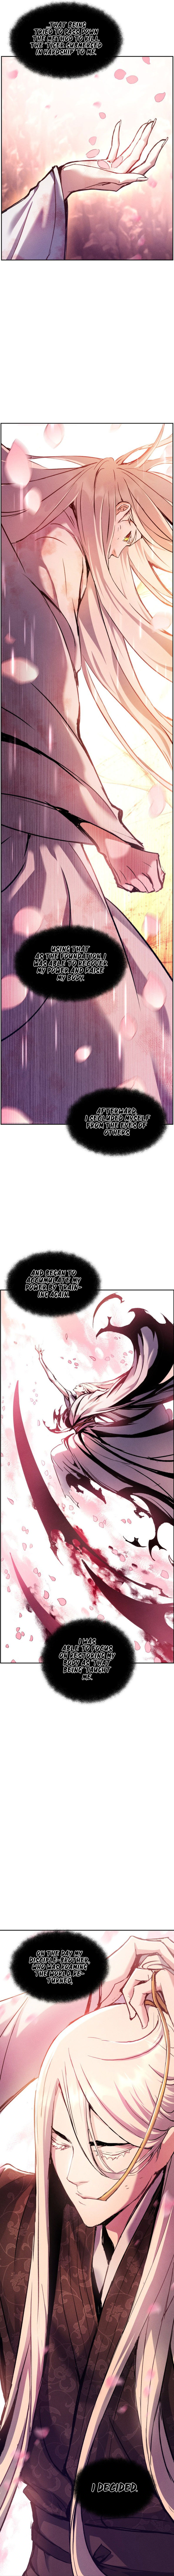 return-of-the-shattered-constellation-chap-31-3